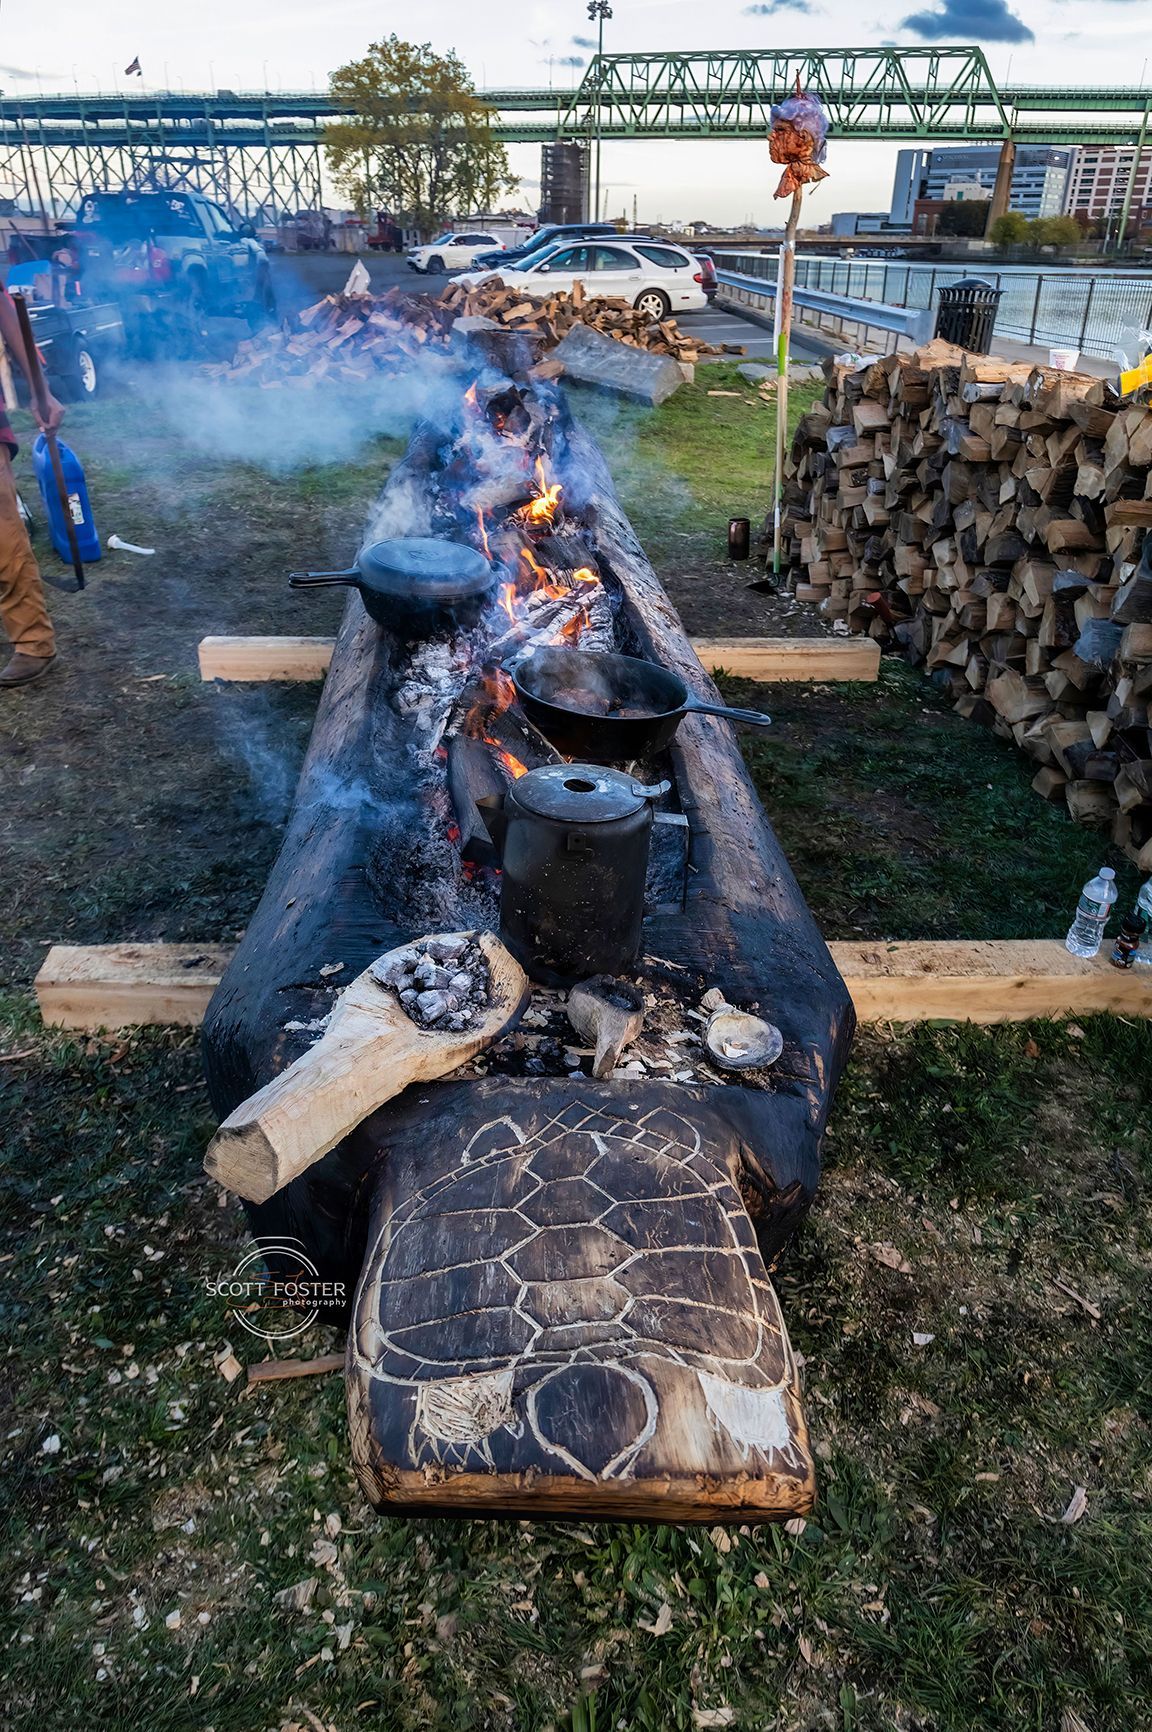 Boston's first Mishoon Burning in 300 years, put on by Indigenous tribes